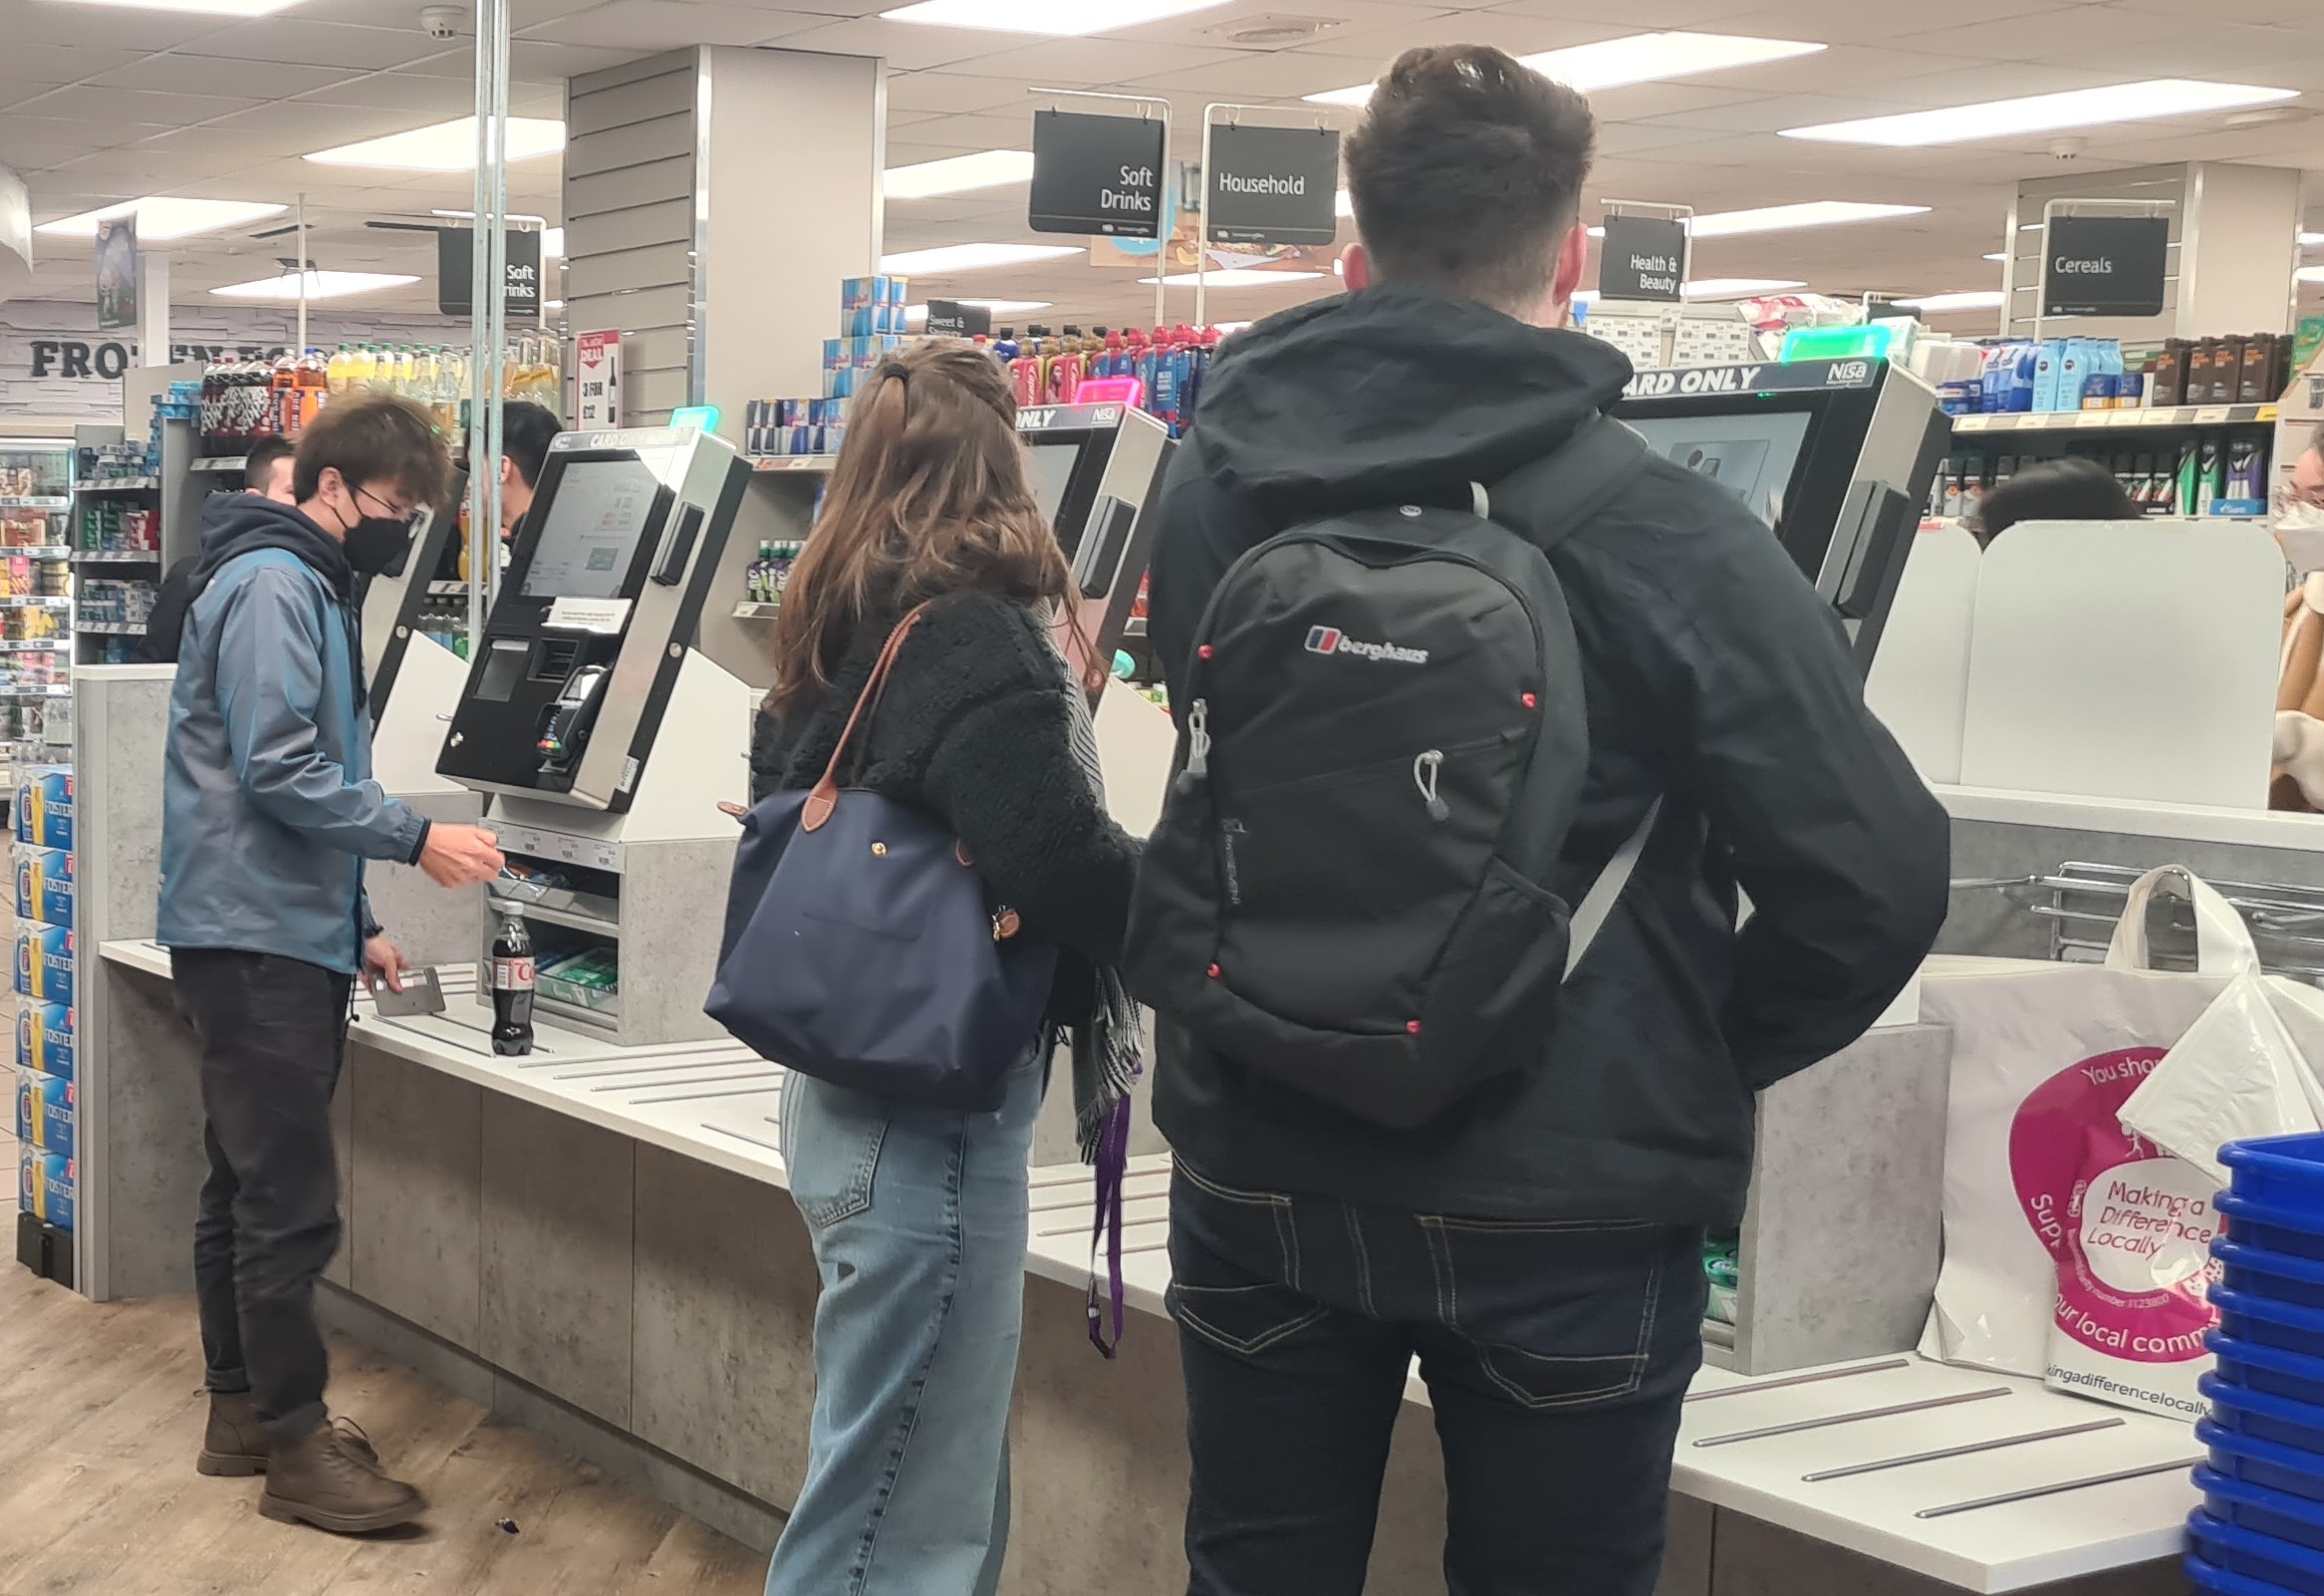 York Nisa store adds more self-service checkouts